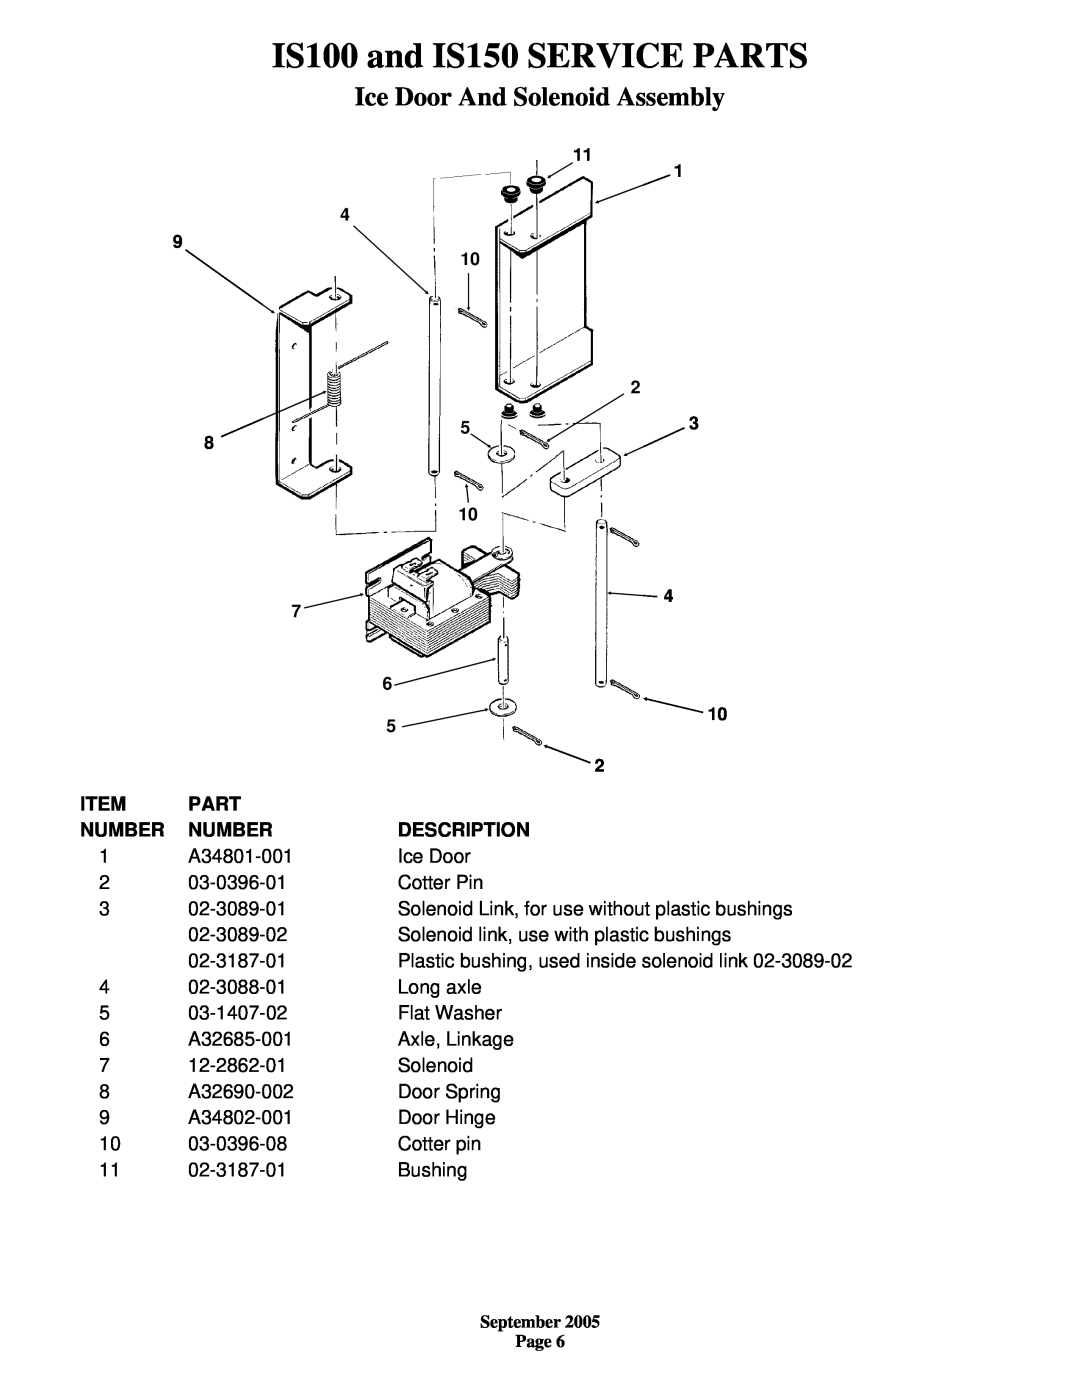 Scotsman Ice manual Ice Door And Solenoid Assembly, IS100 and IS150 SERVICE PARTS, Part, Number, Description 